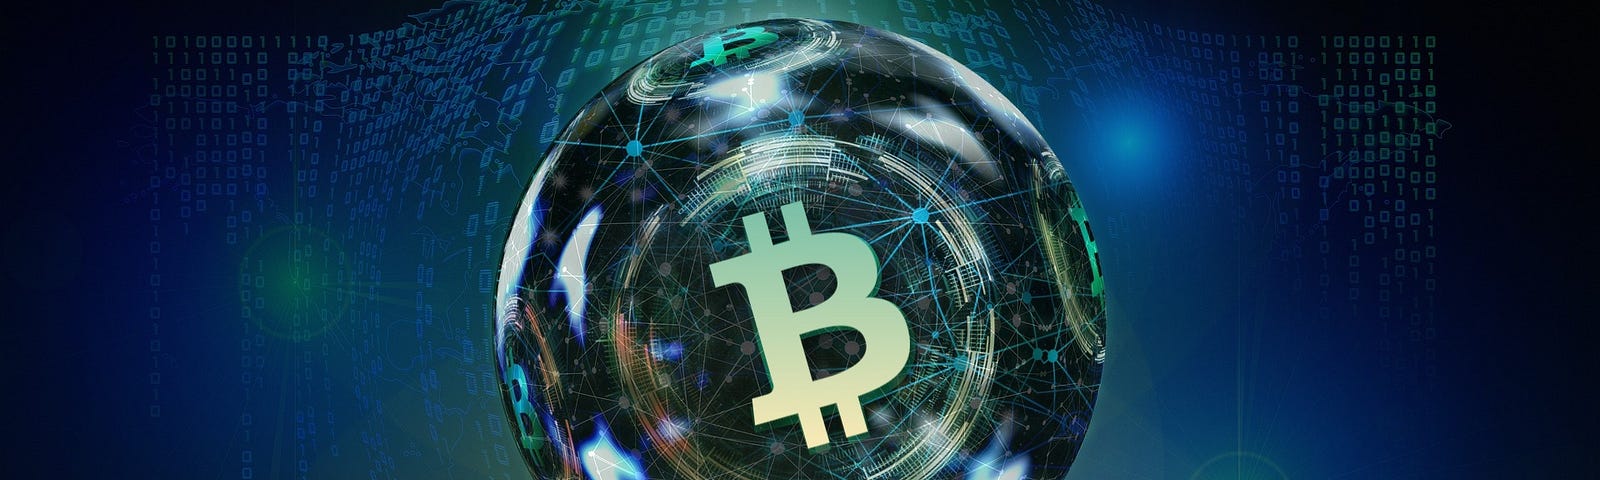 Background dark blue/black and green lights at the center. A hand holding a crystal ball with green Bitcoin logo (Bitcoin Cash).